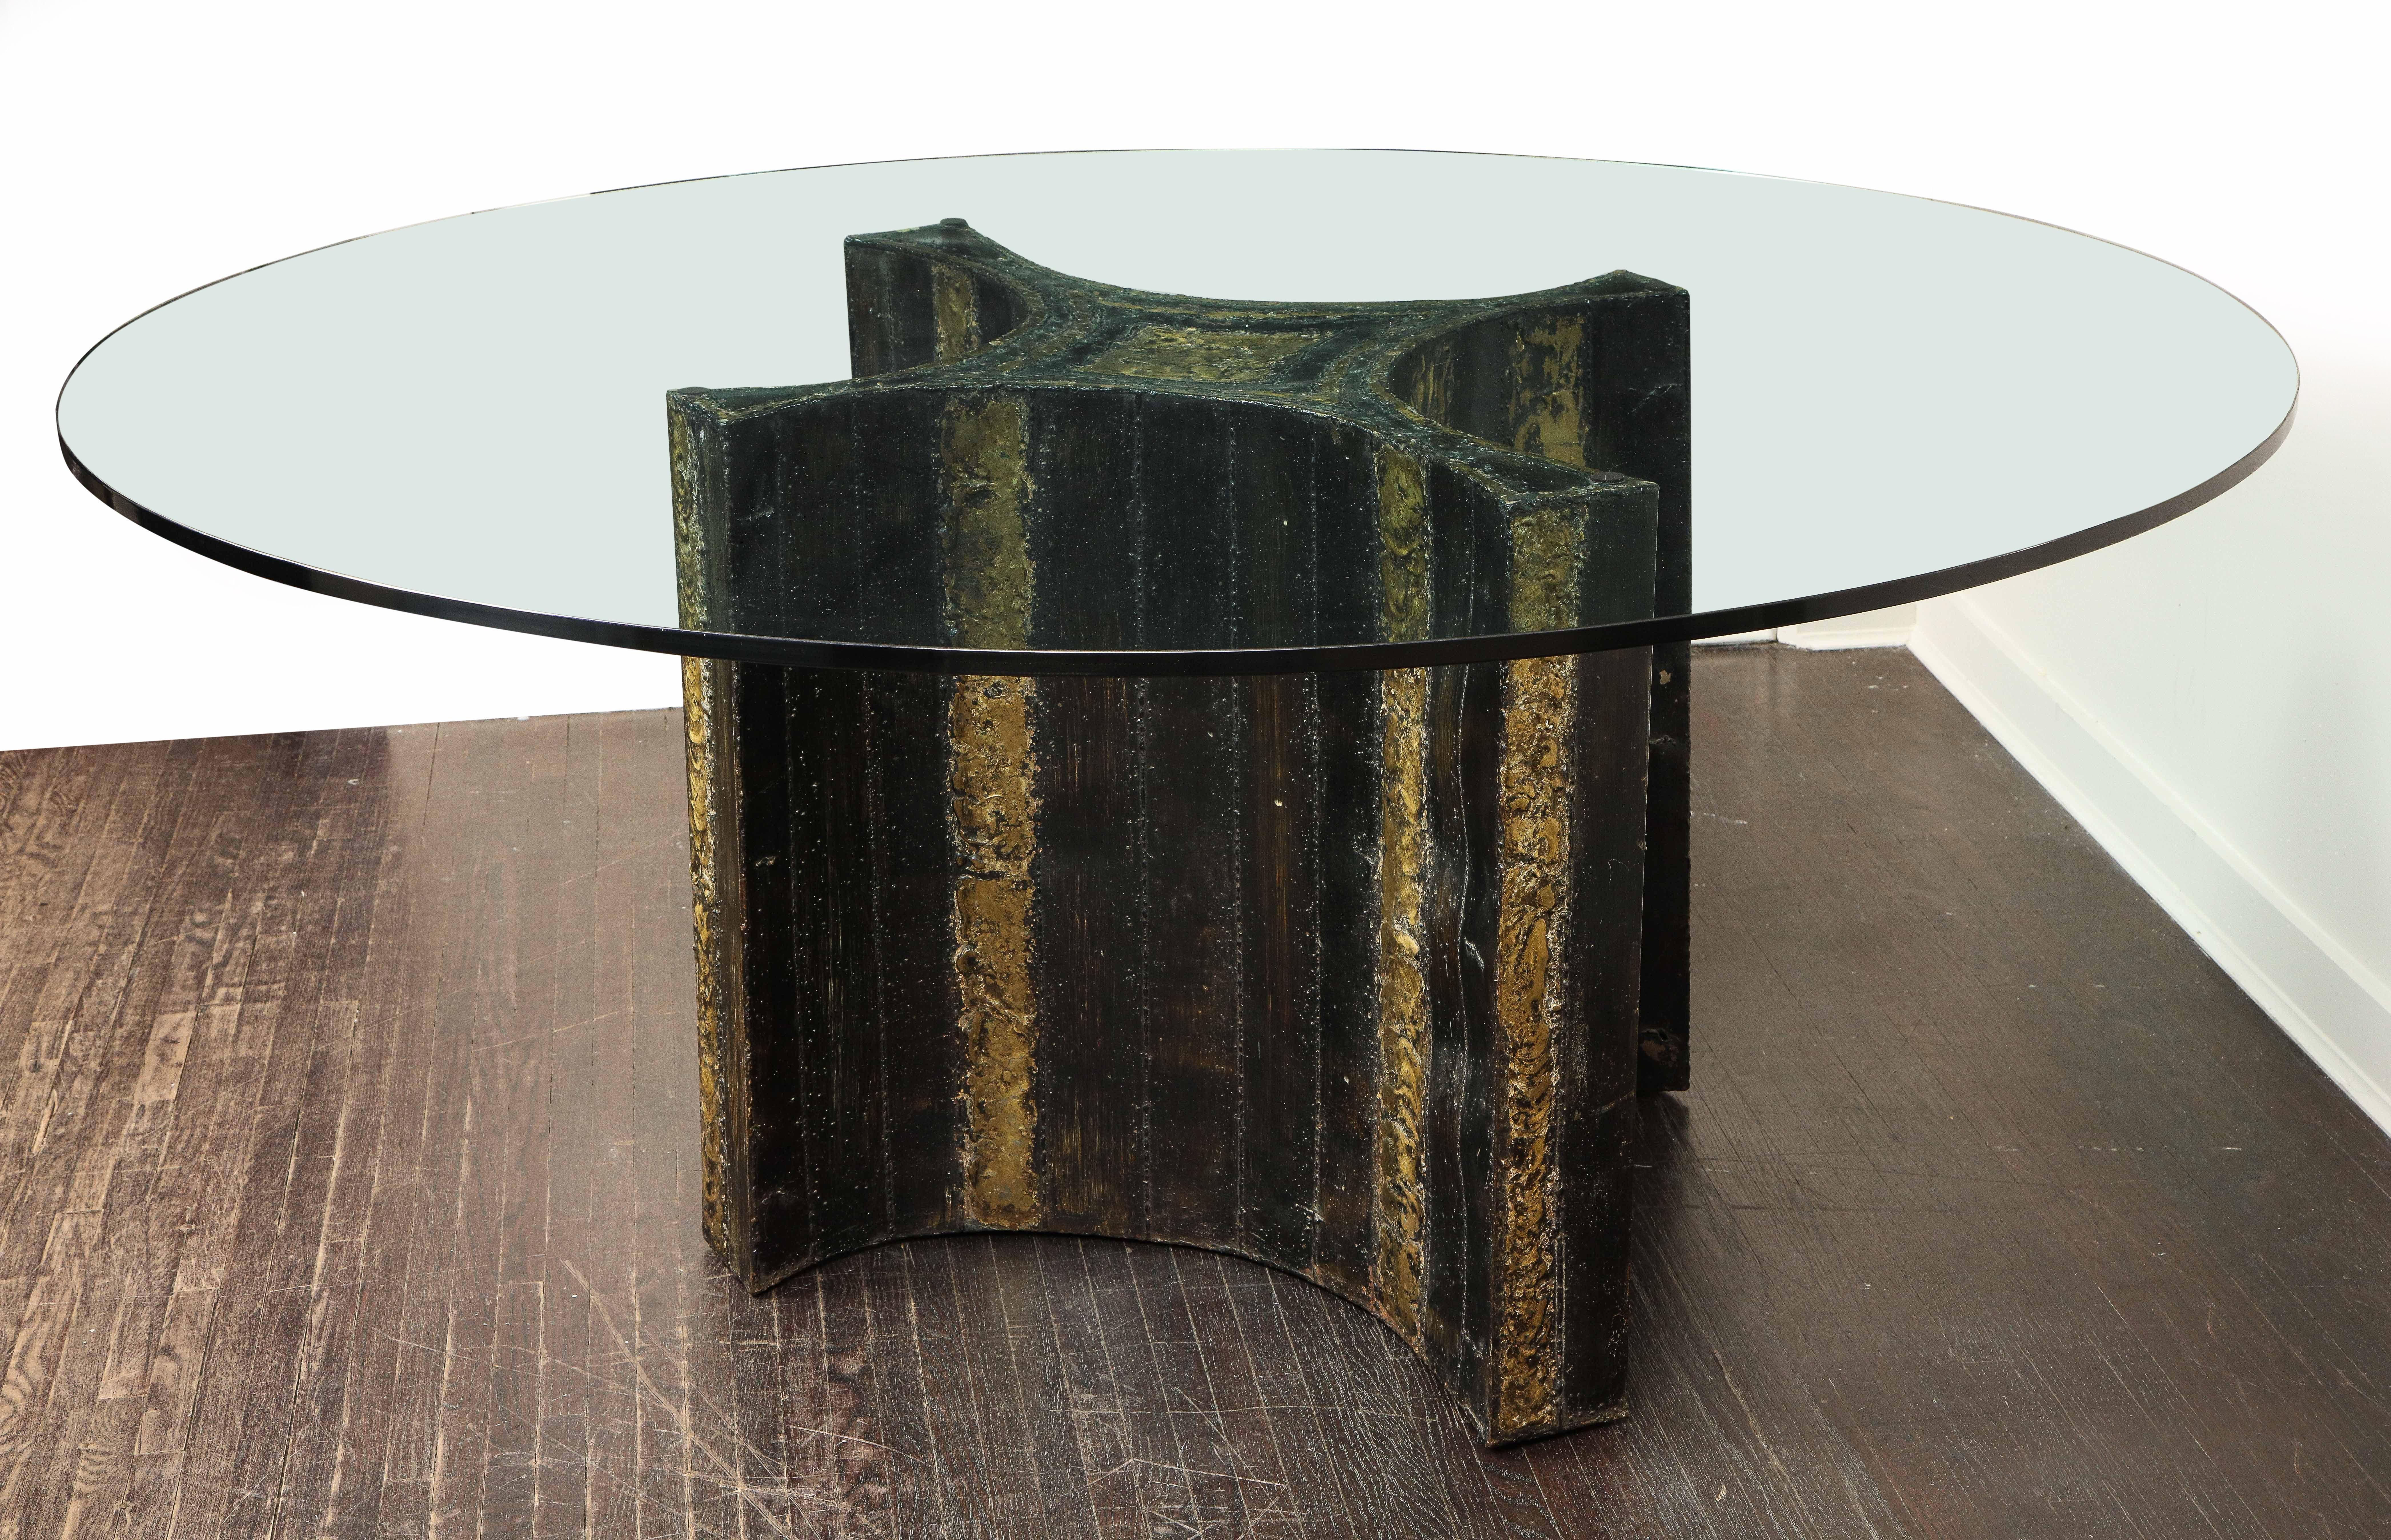 One of a kind vintage Paul Evans Brutalist dining table, Model No. PE 23. Iconic and Impressive dining table made of painted and welded steel and bronze. It was designed by Paul Evans Studio for Direction Furniture Company in New York. The entire